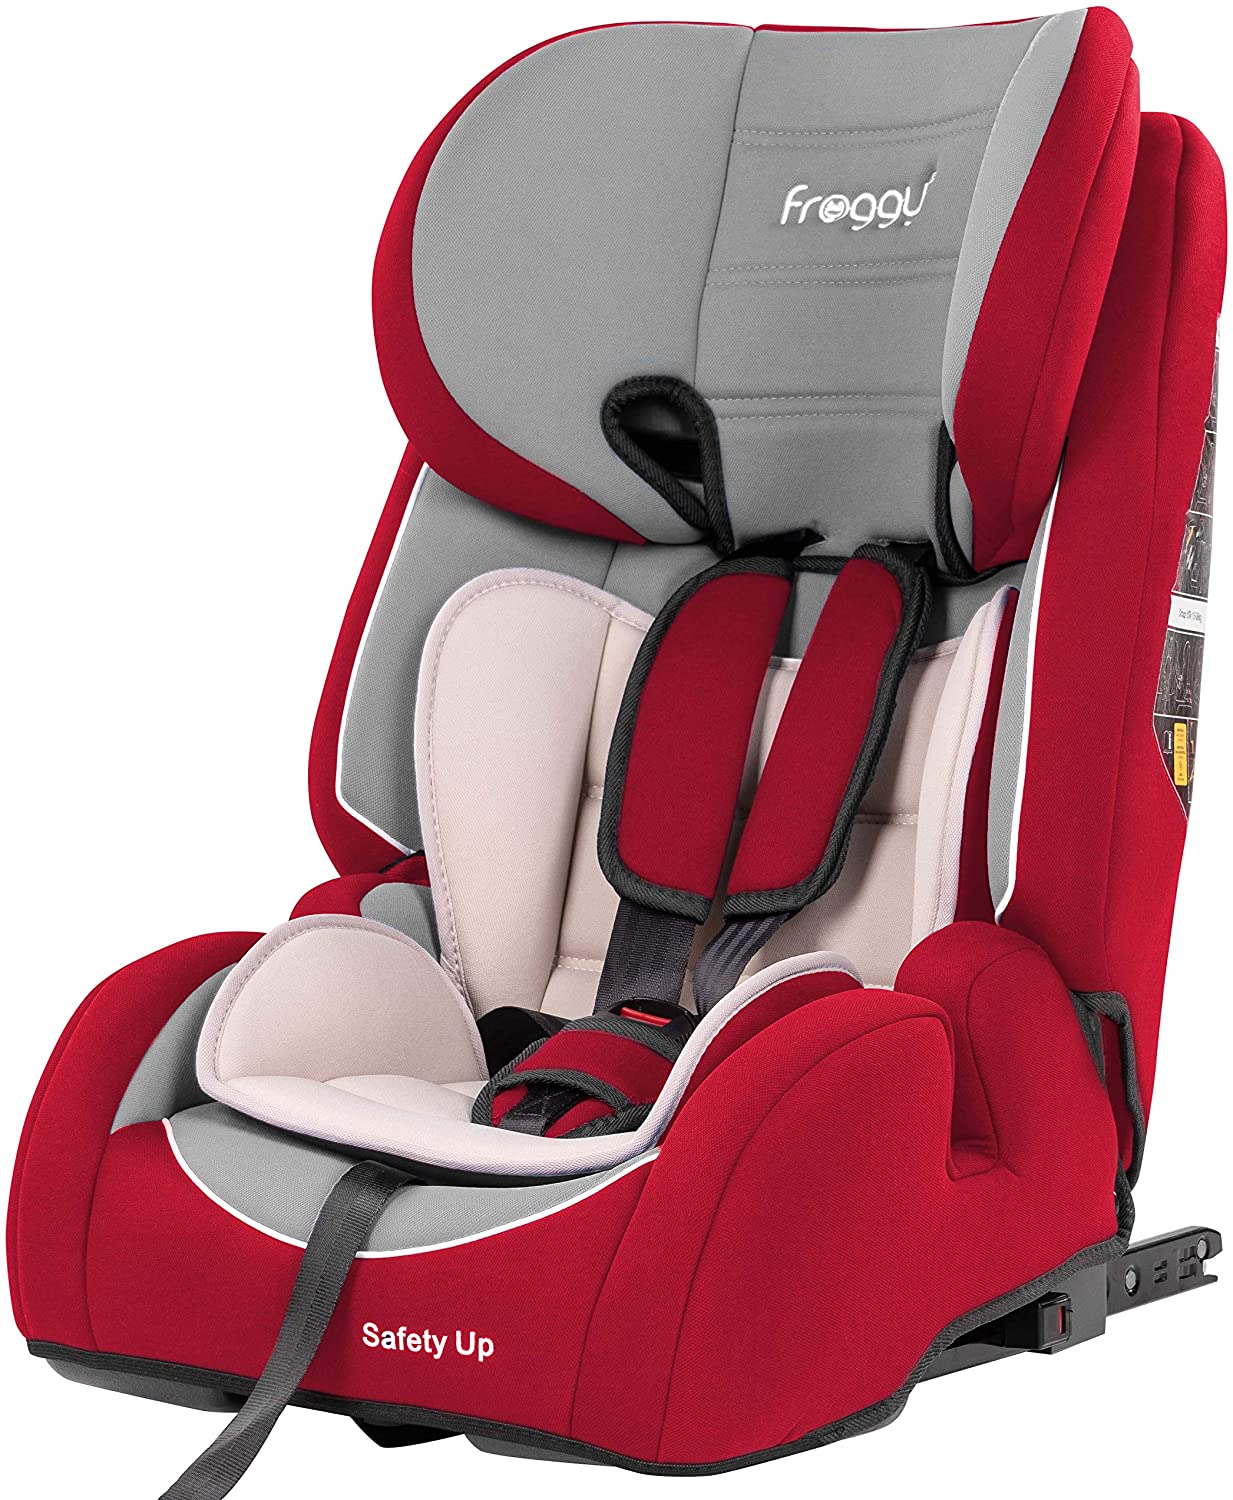 Froggy® Safety Up Children’s Car Seat with ISOFIX Group I/II/III (9-36 kg) + ECE R44/04 Safety Standard + 5-Point Safety Belt, Adjustable Headrest, blue